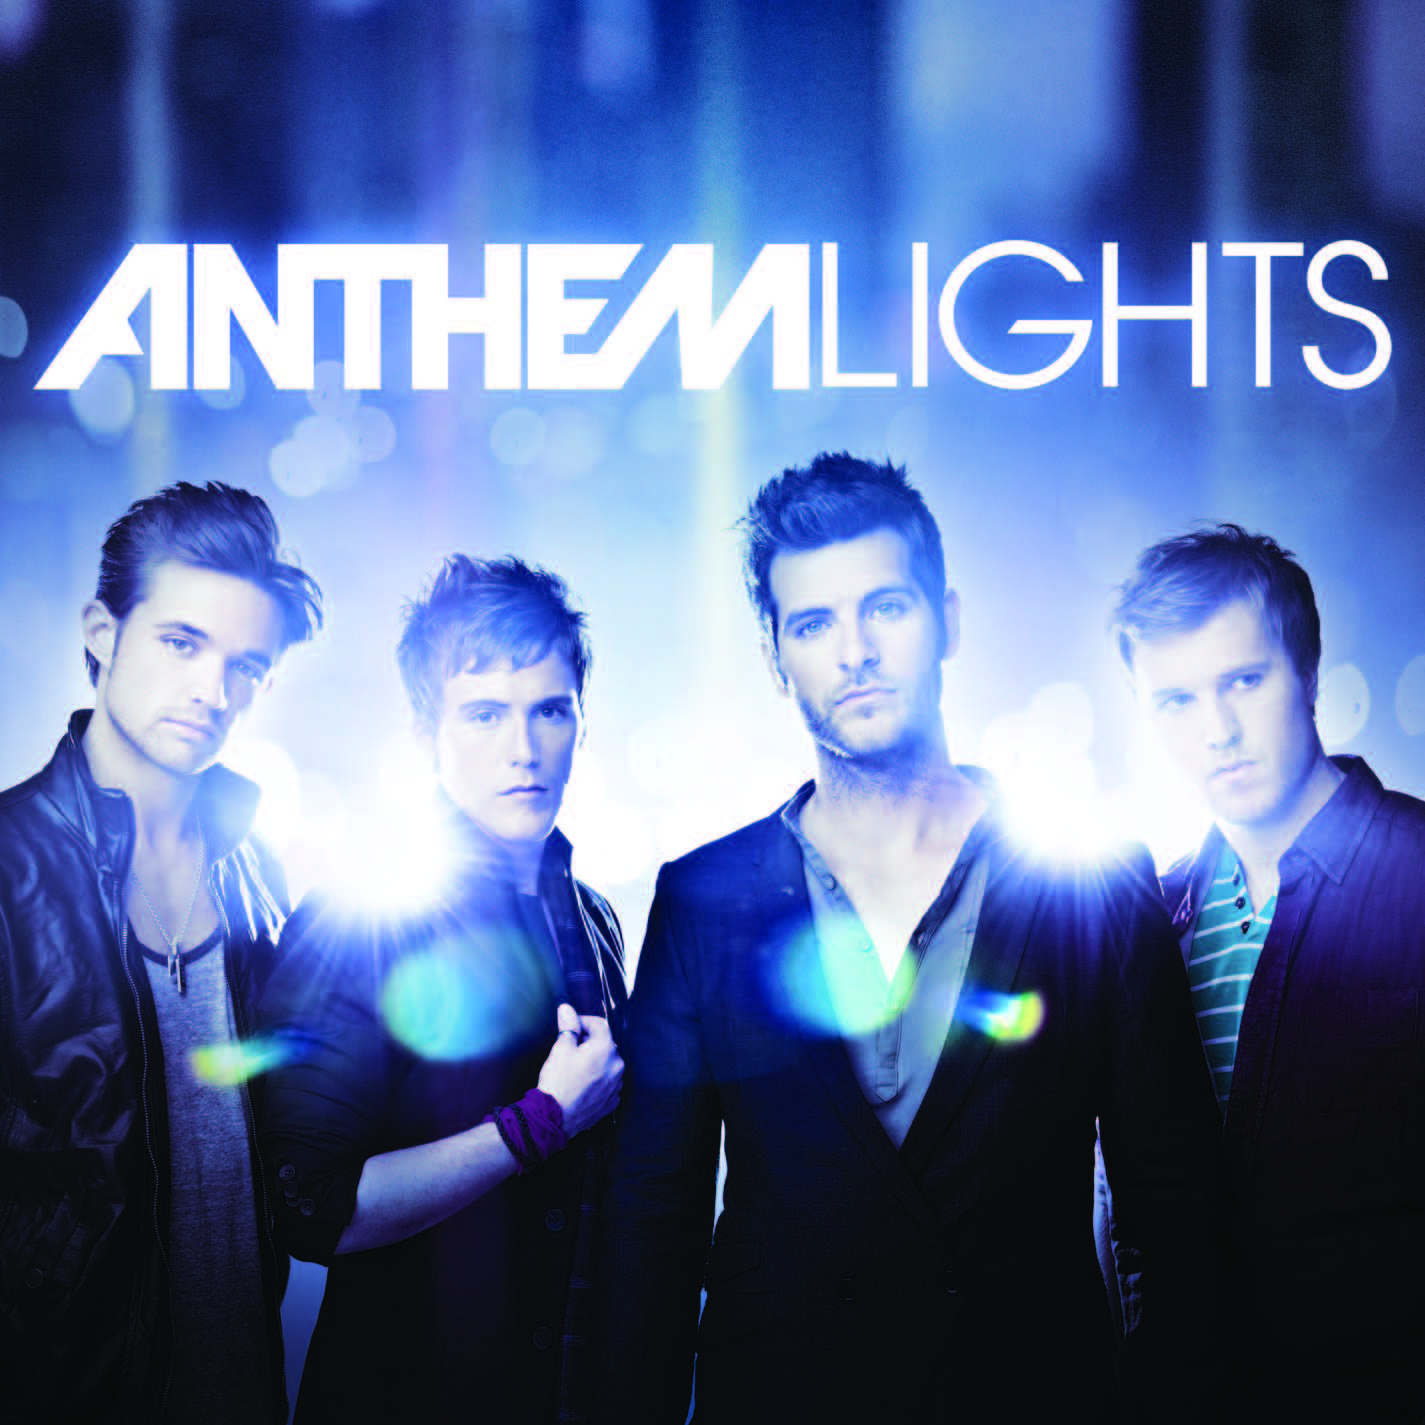 A conversation with pop band Anthem Lights Whole Notes